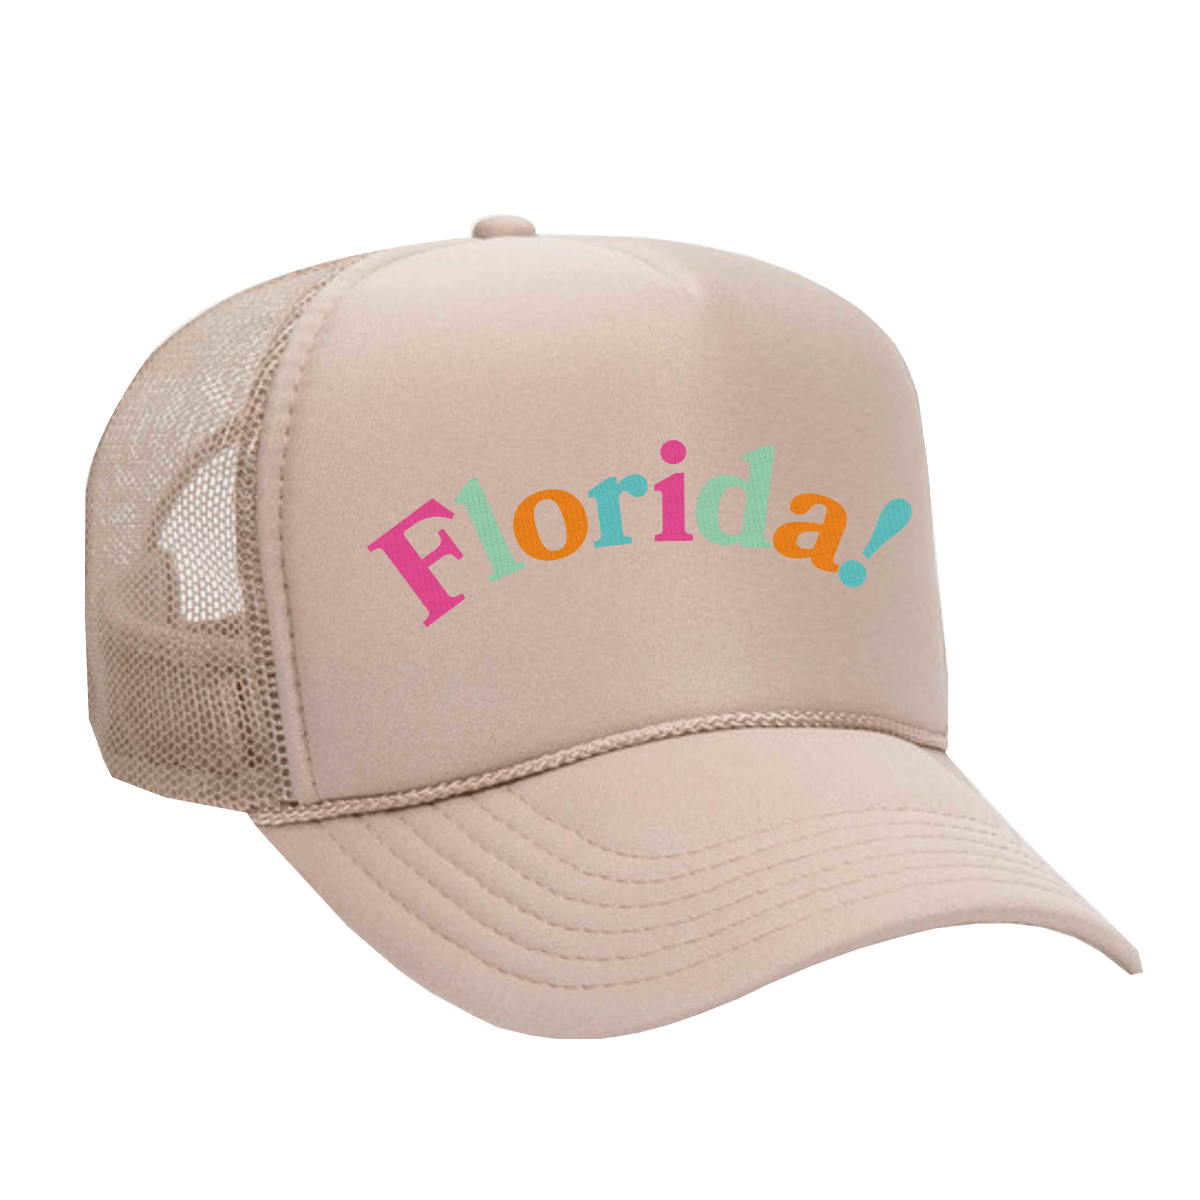 Florida! Embroidered Hat - Shop B-Unlimited